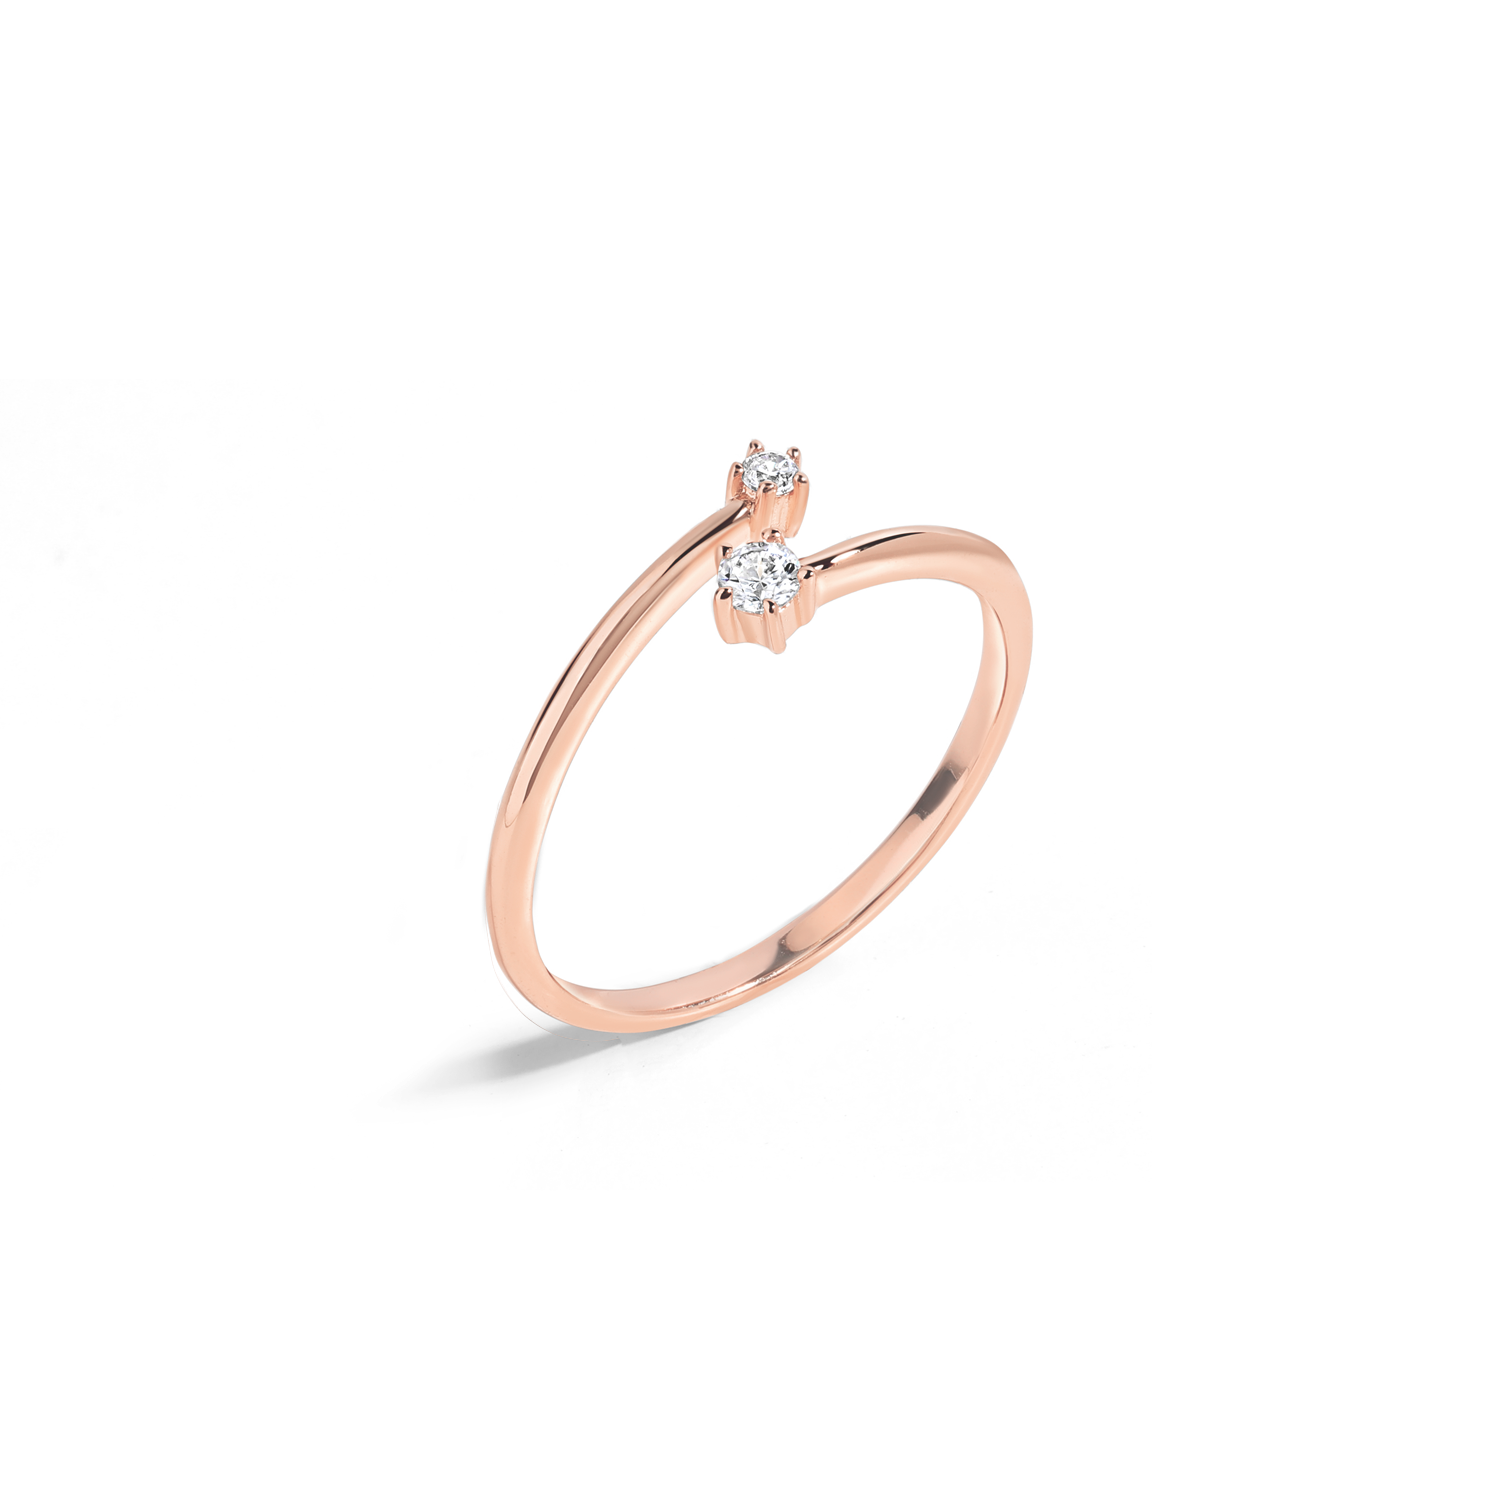 Delicate and elegant ring in rose gold with cubic zirconia. 